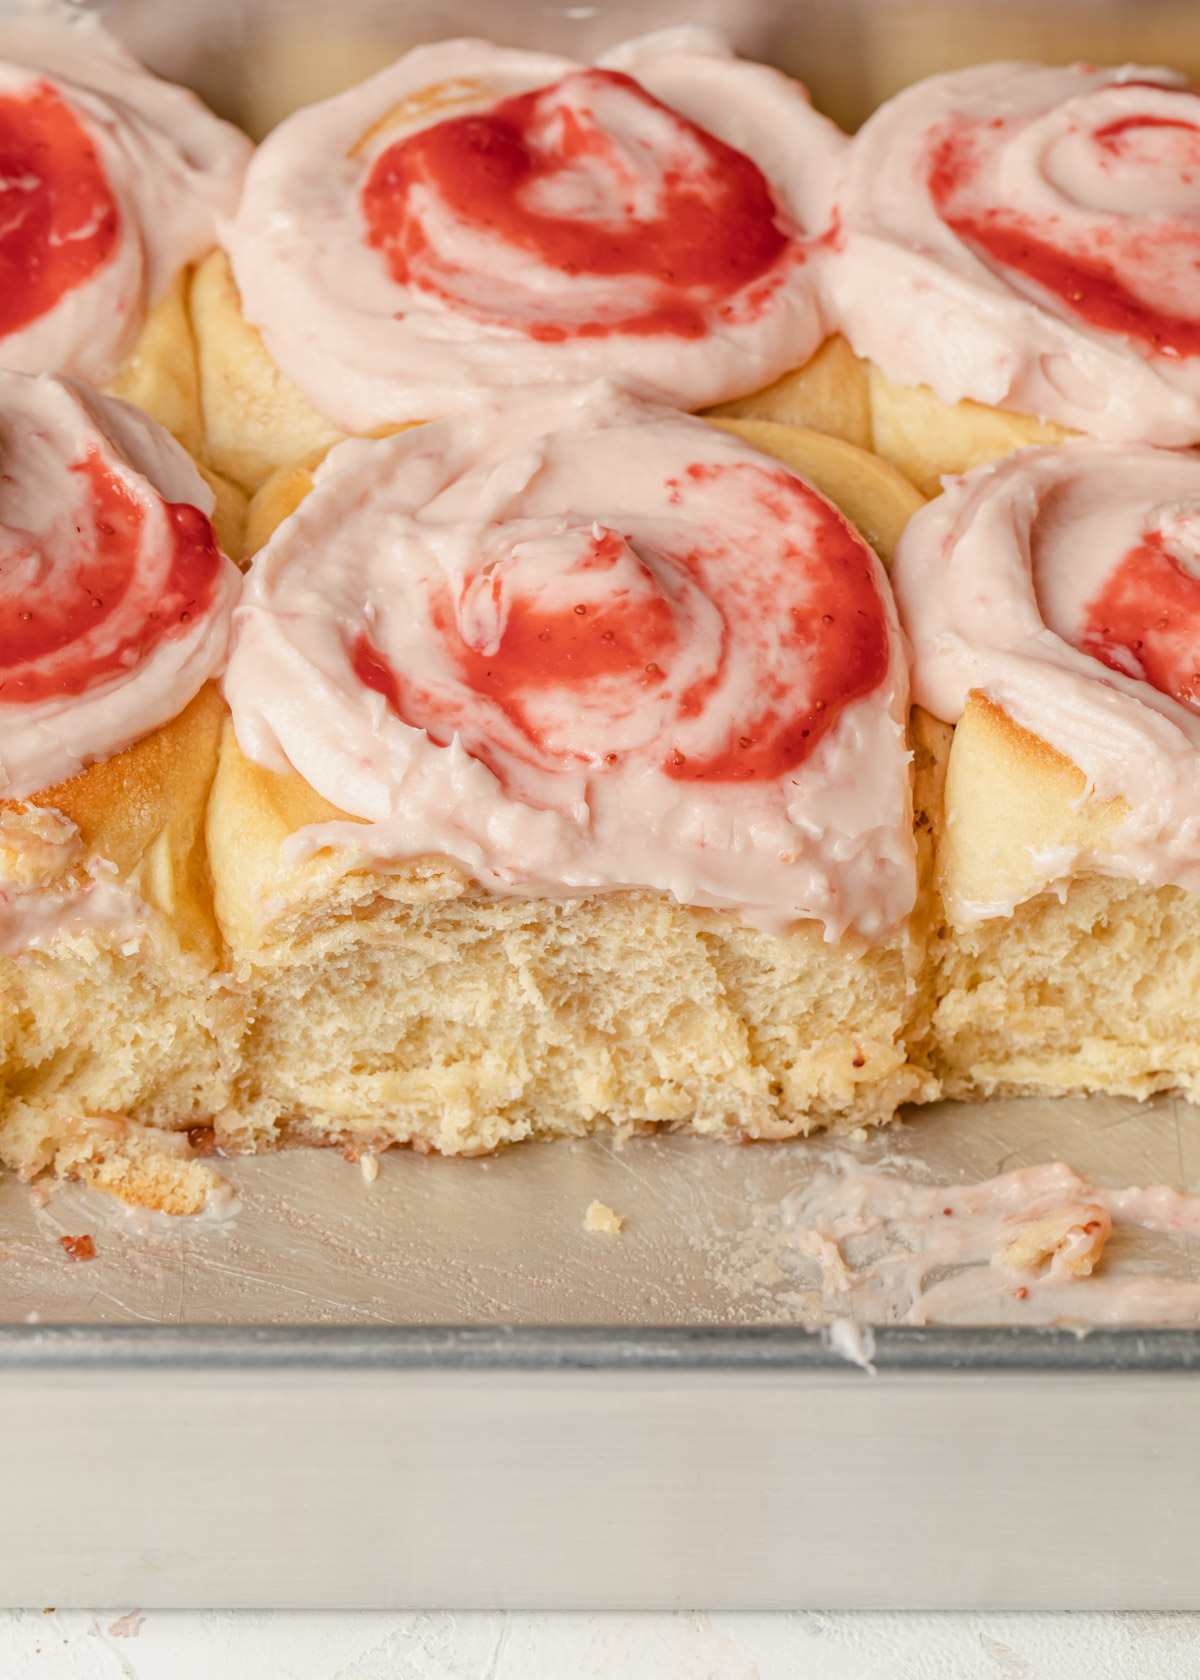 Strawberry cinnamon rolls that are frosted in the pan and showing off the fluffy texture of the dough.